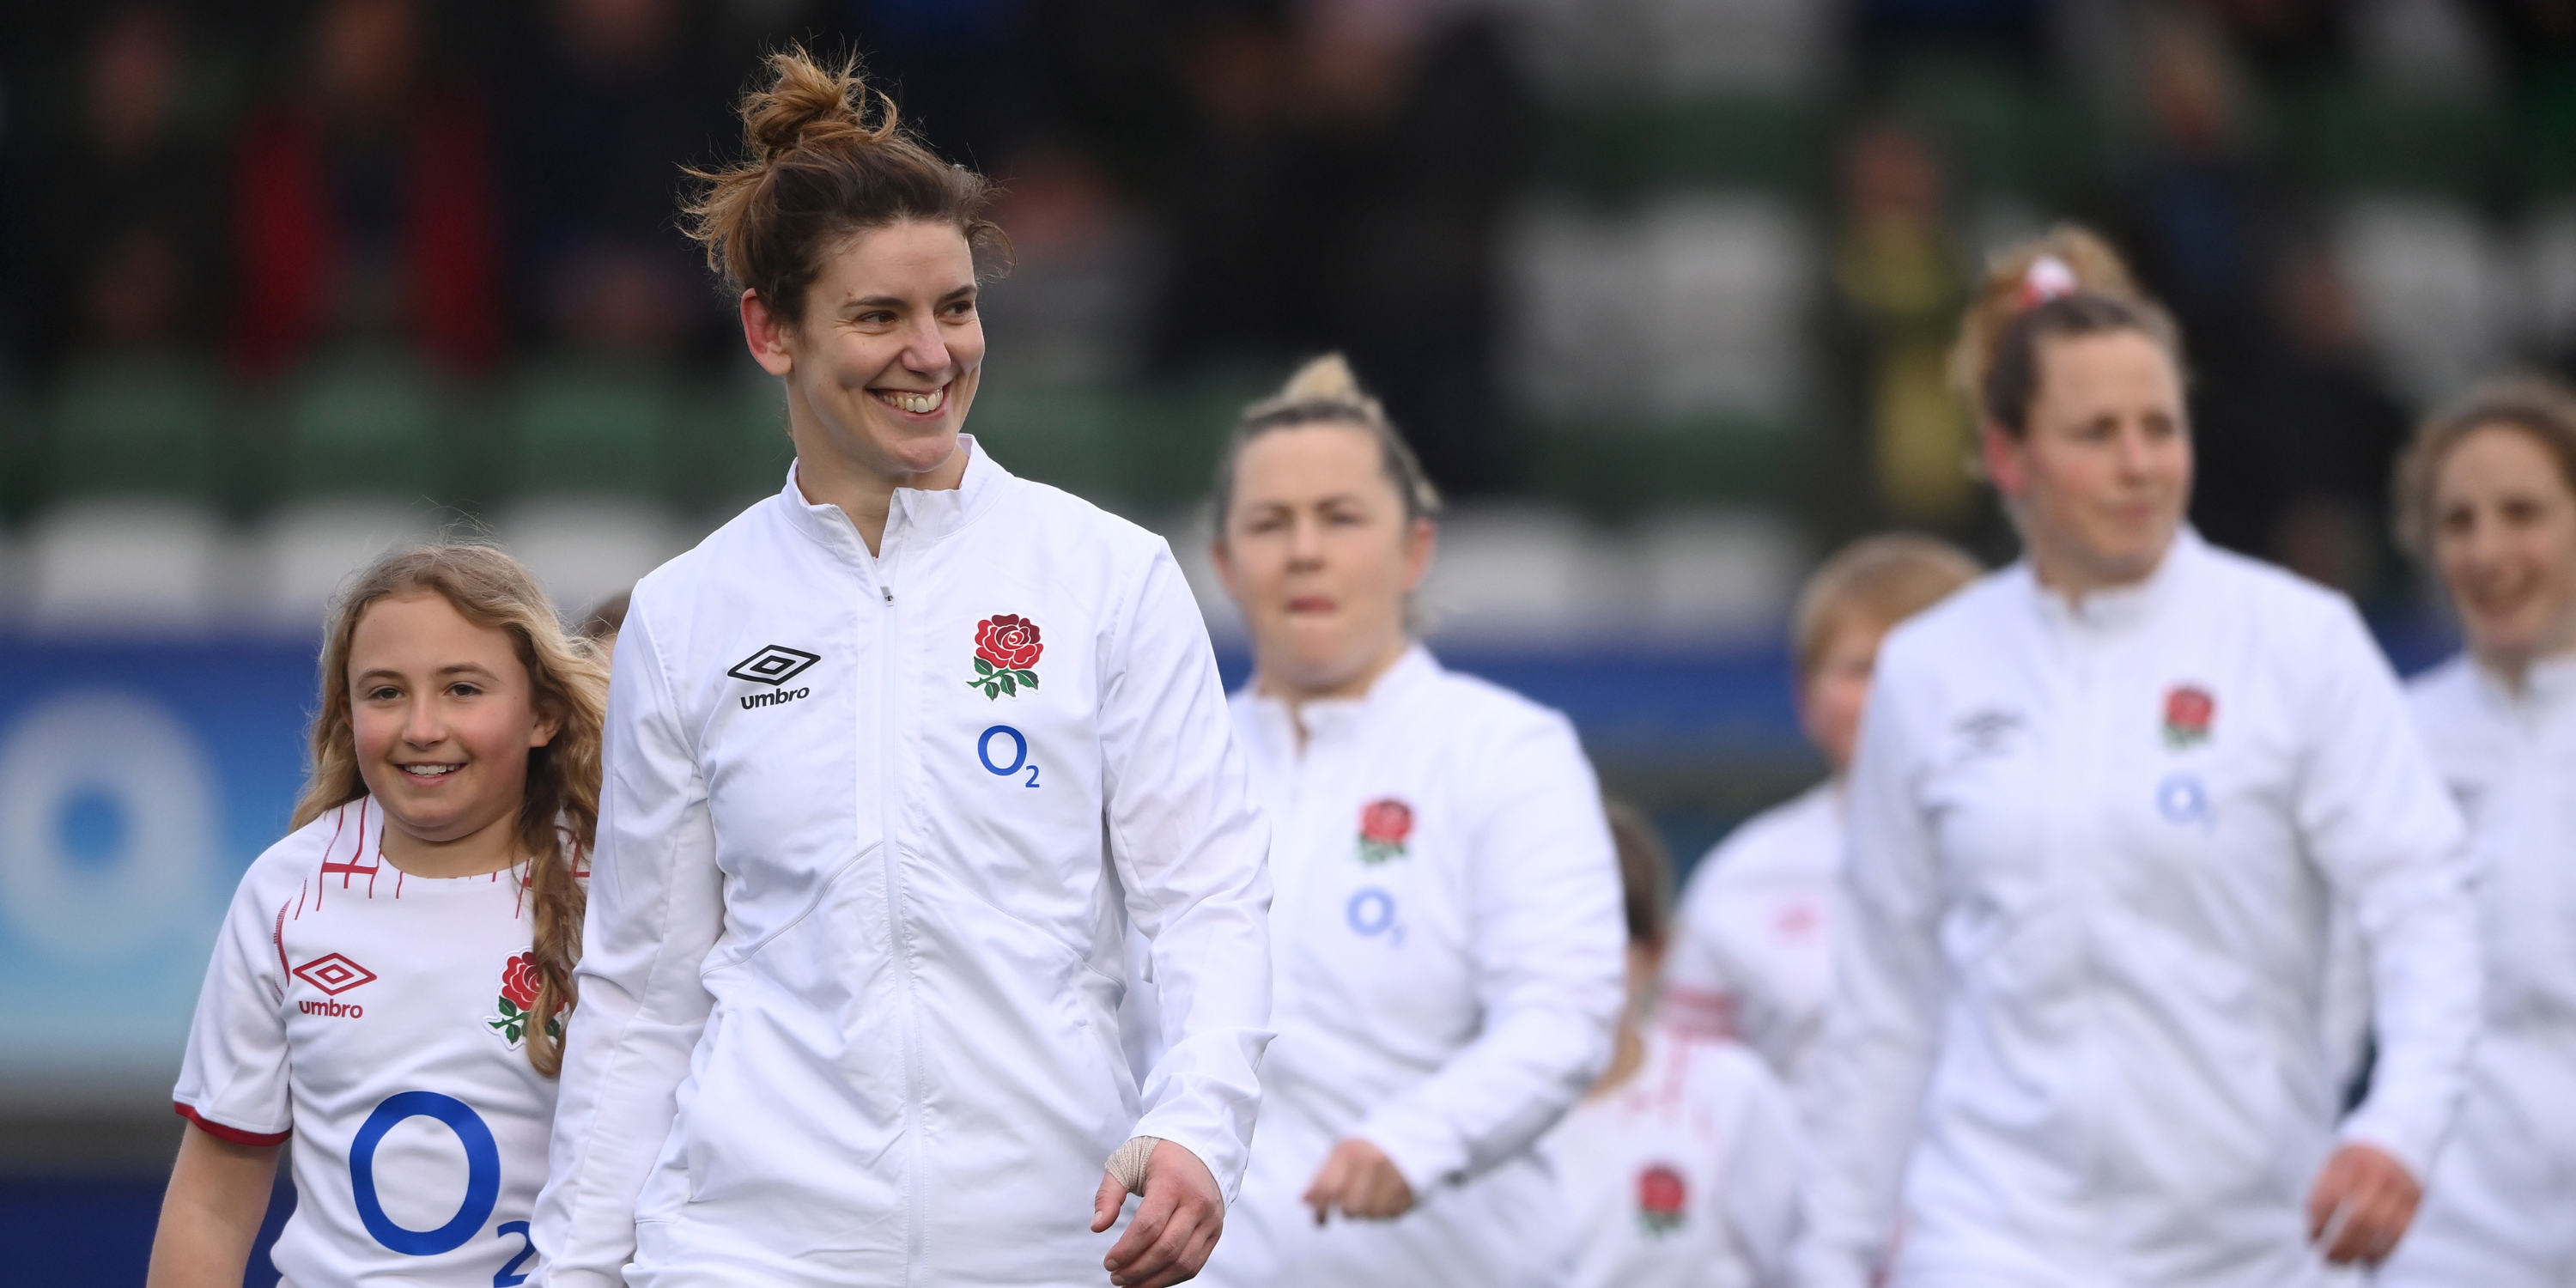 England's most capped rugby player Sarah Hunter spoke to GiveMeSport